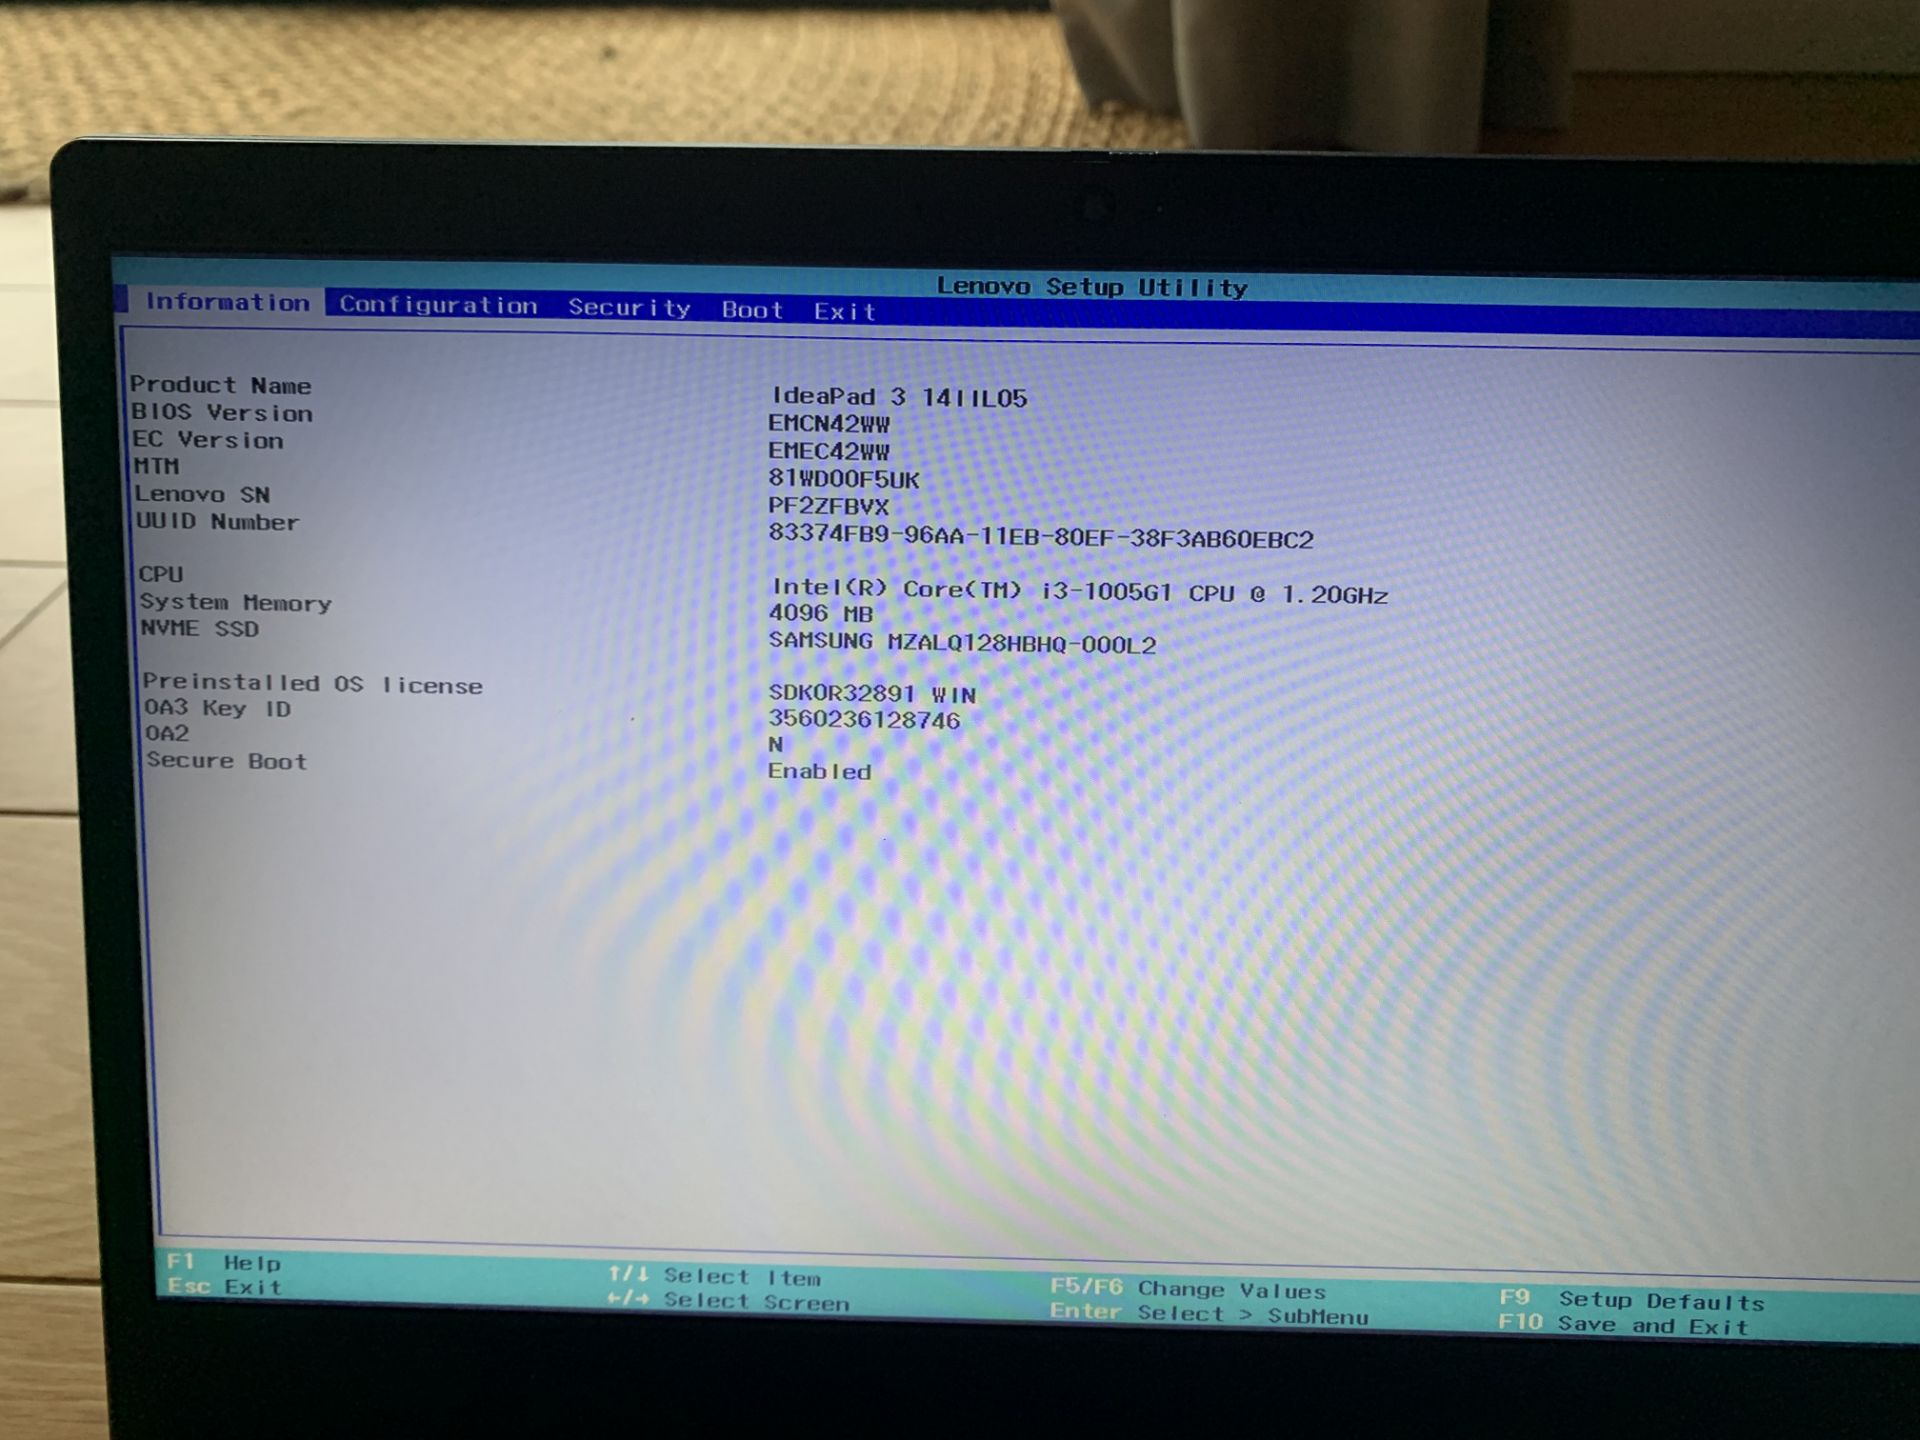 Lenovo IdeaPad 3 14IIL05 Core i3 Laptop, Serial No. PF2ZFBVX (No Charger) (Hard Drive Wiped) - Image 2 of 2